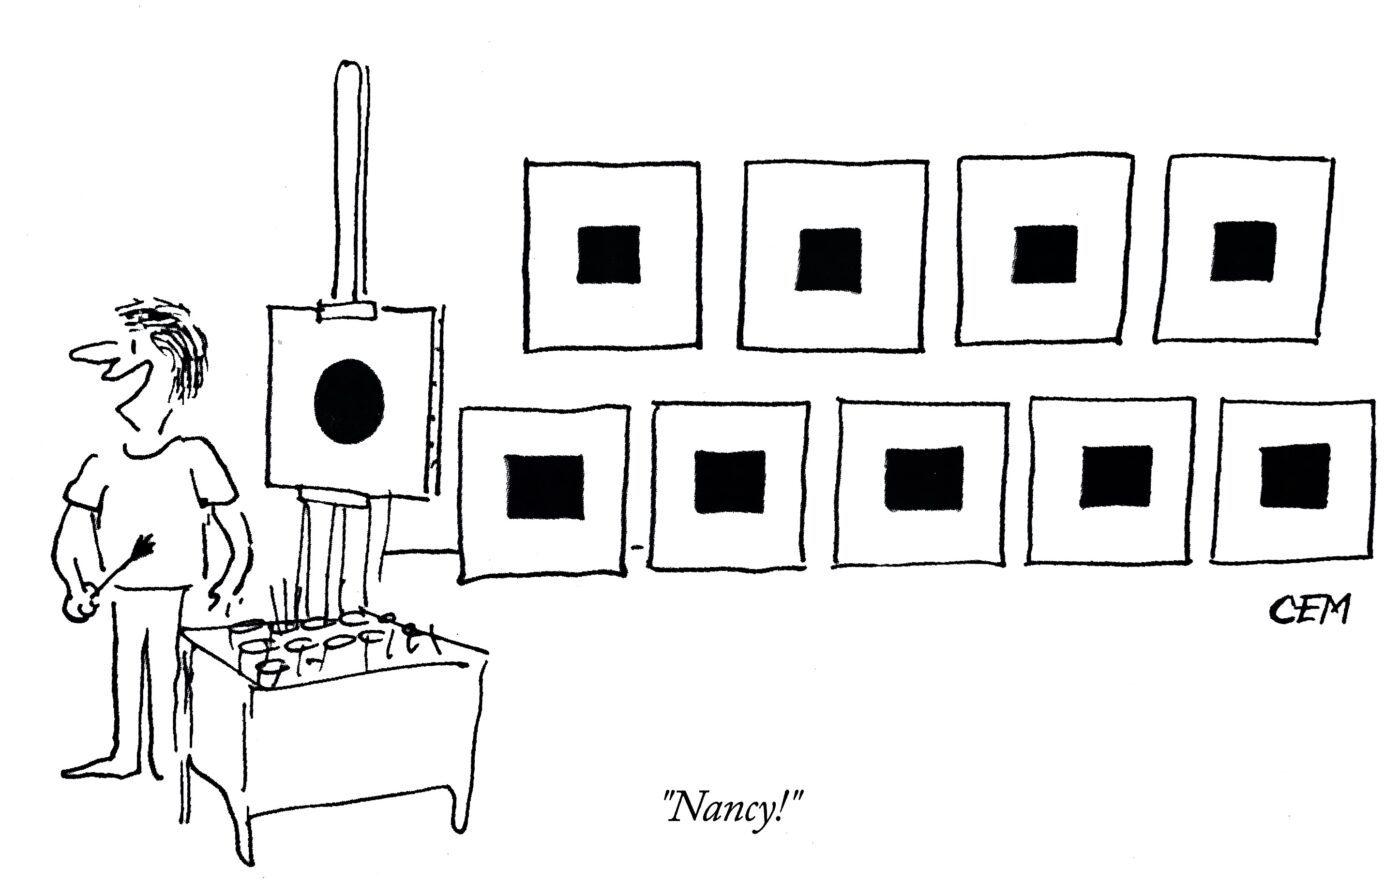 A cartoon of a man standing in front of a display of pictures.